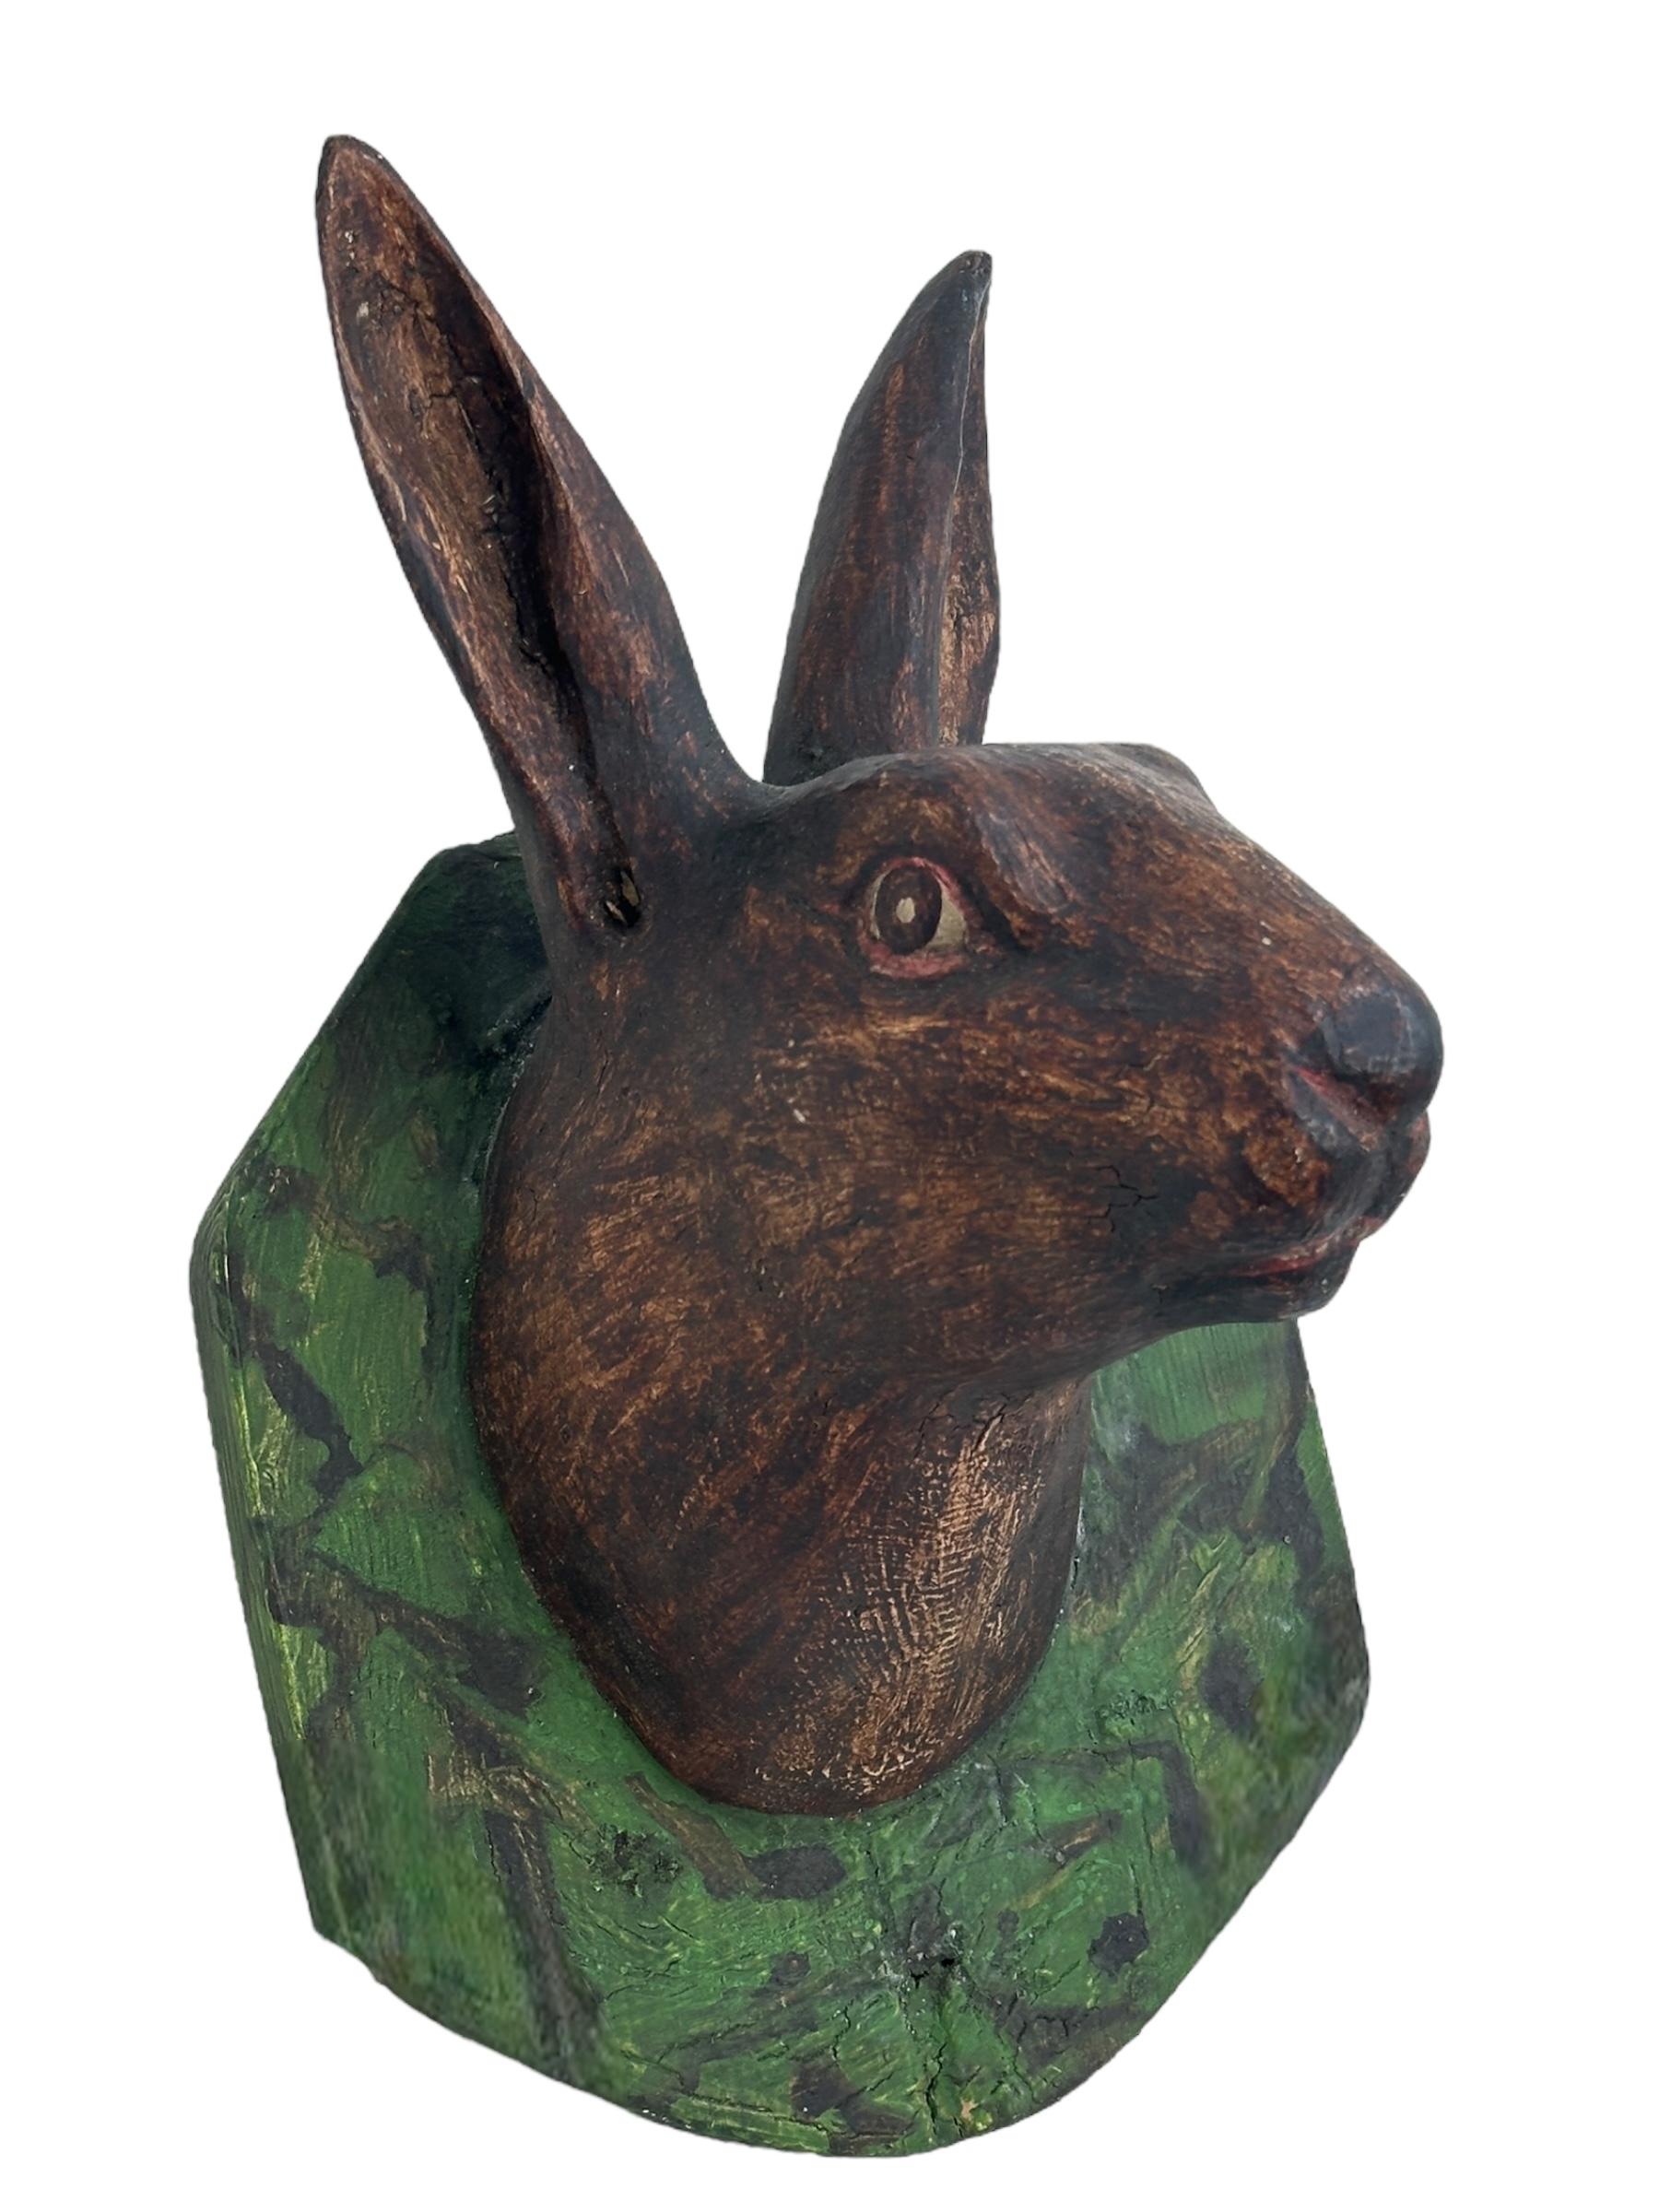 A great looking hand carved original wooden Folk Art Bunny head wall decoration. A great piece for a suitable ambiance in a trophy room or the office of a Hunter or Woodsman. More than likely one of the Folk Art items made between 1860 and the late